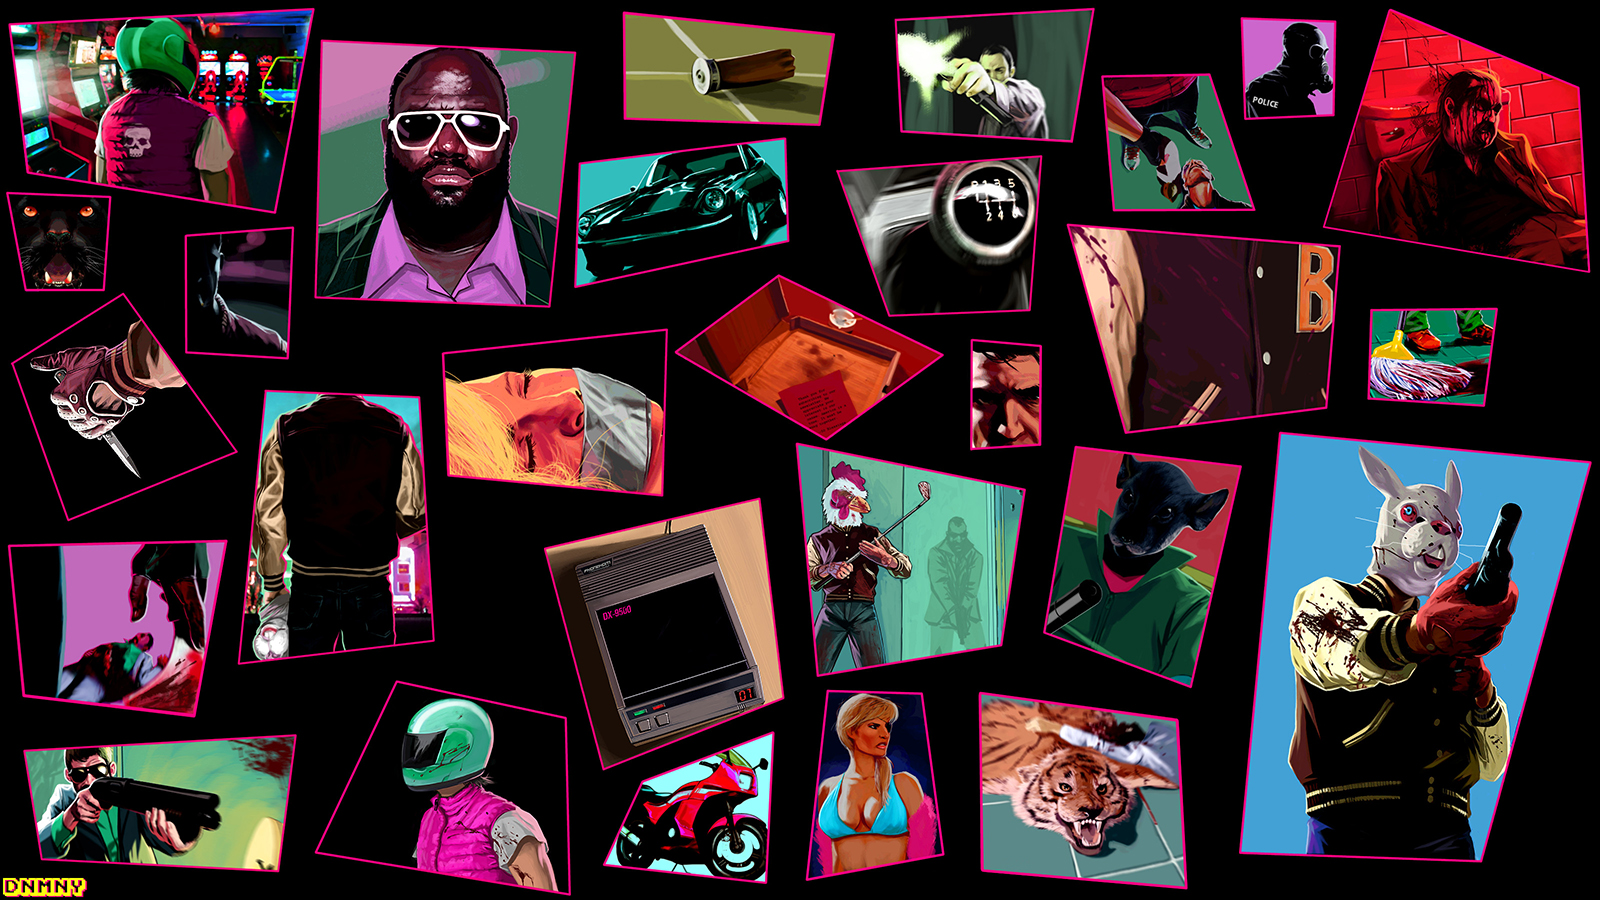 Hotline Miami Hotline Miami 2 Video Games Digital Art Simple Background Watermarked Video Game Chara 1600x900